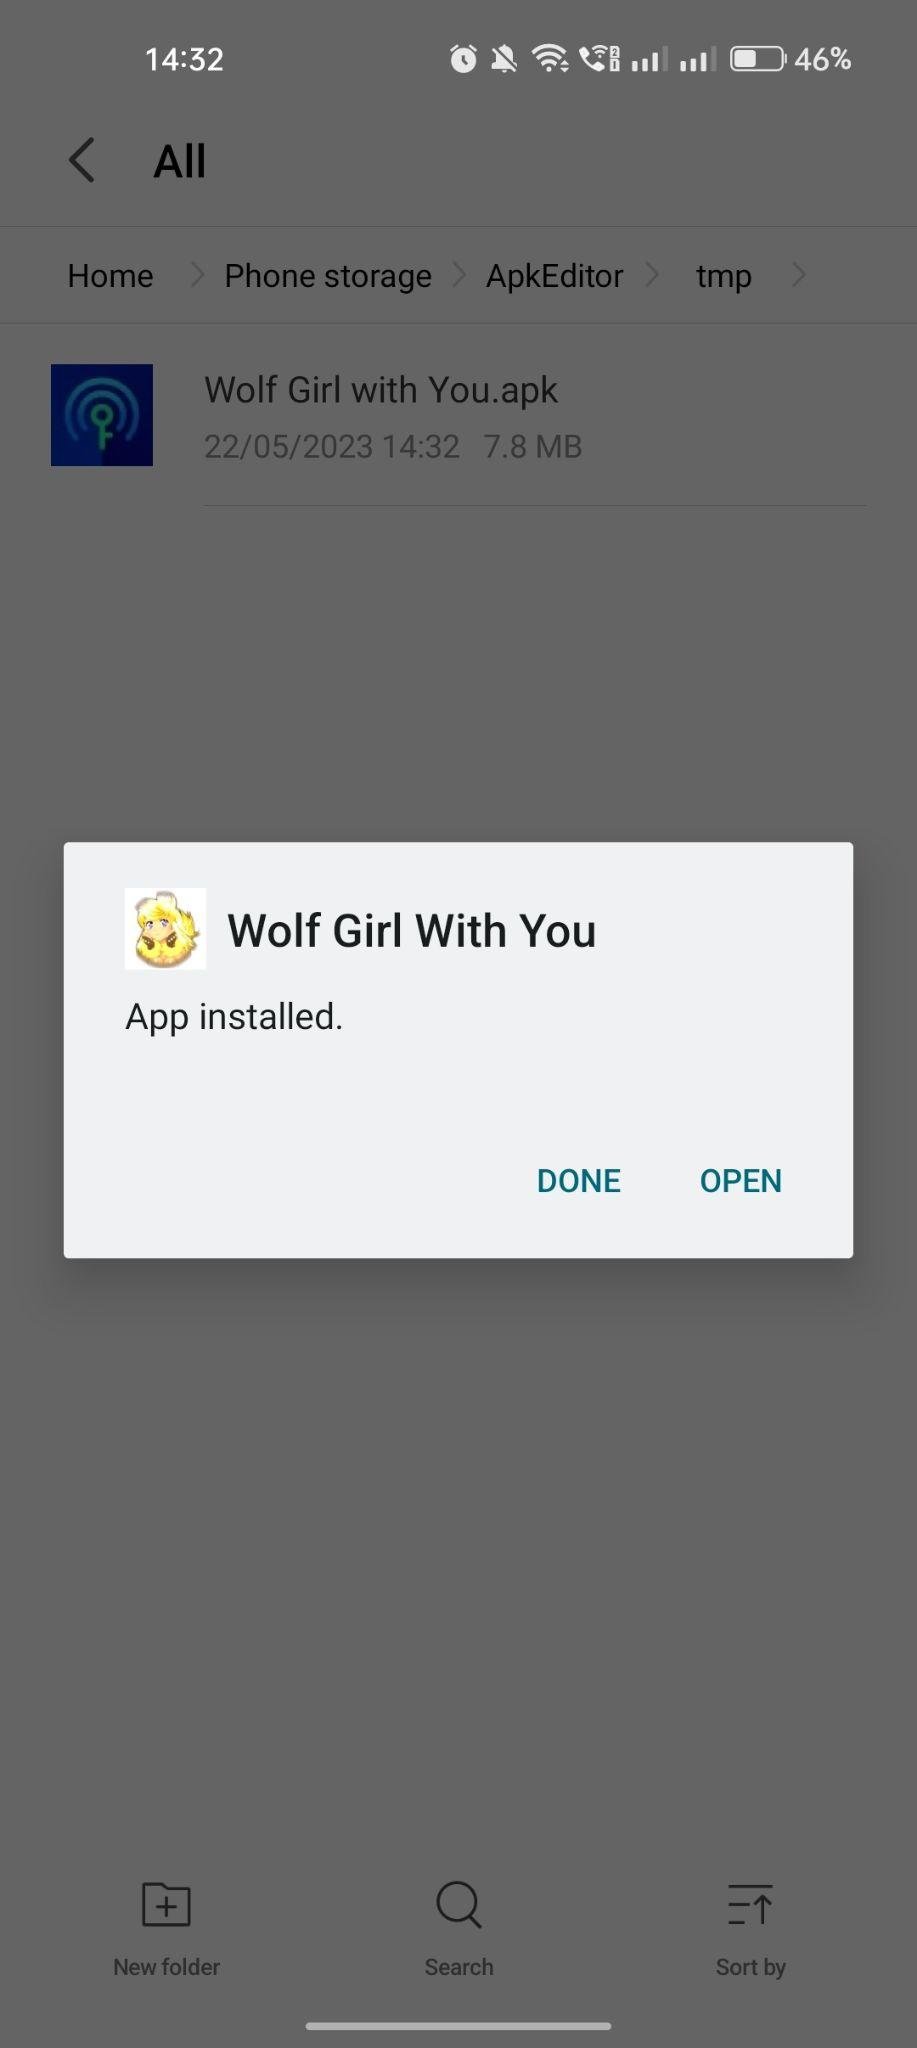 Wolf Girl With You apk installed